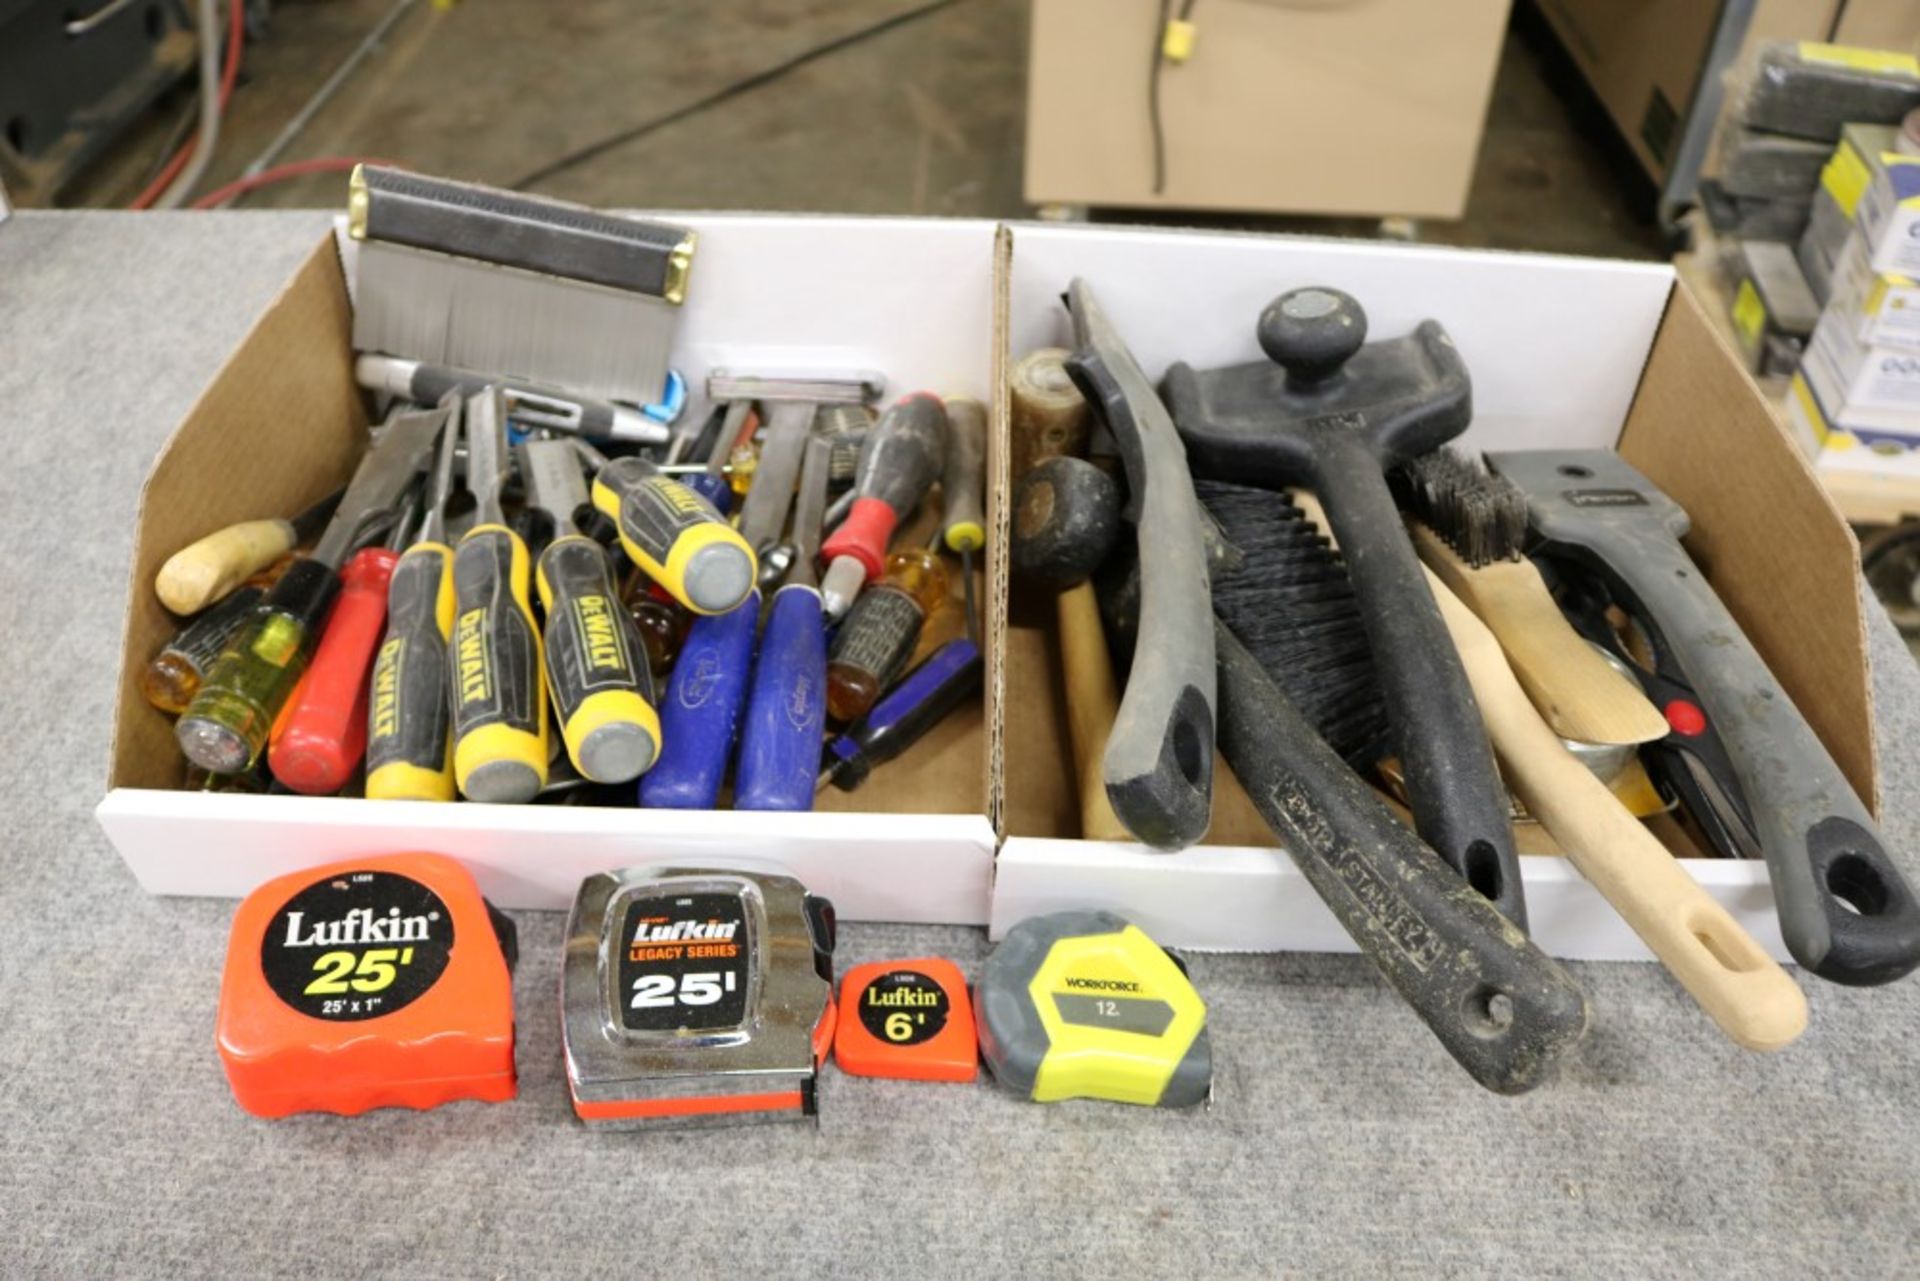 2 Boxes fo Various Tools, Chisels, Screw Drivers, Flatheads, Tape Measurers, Box Cutters,